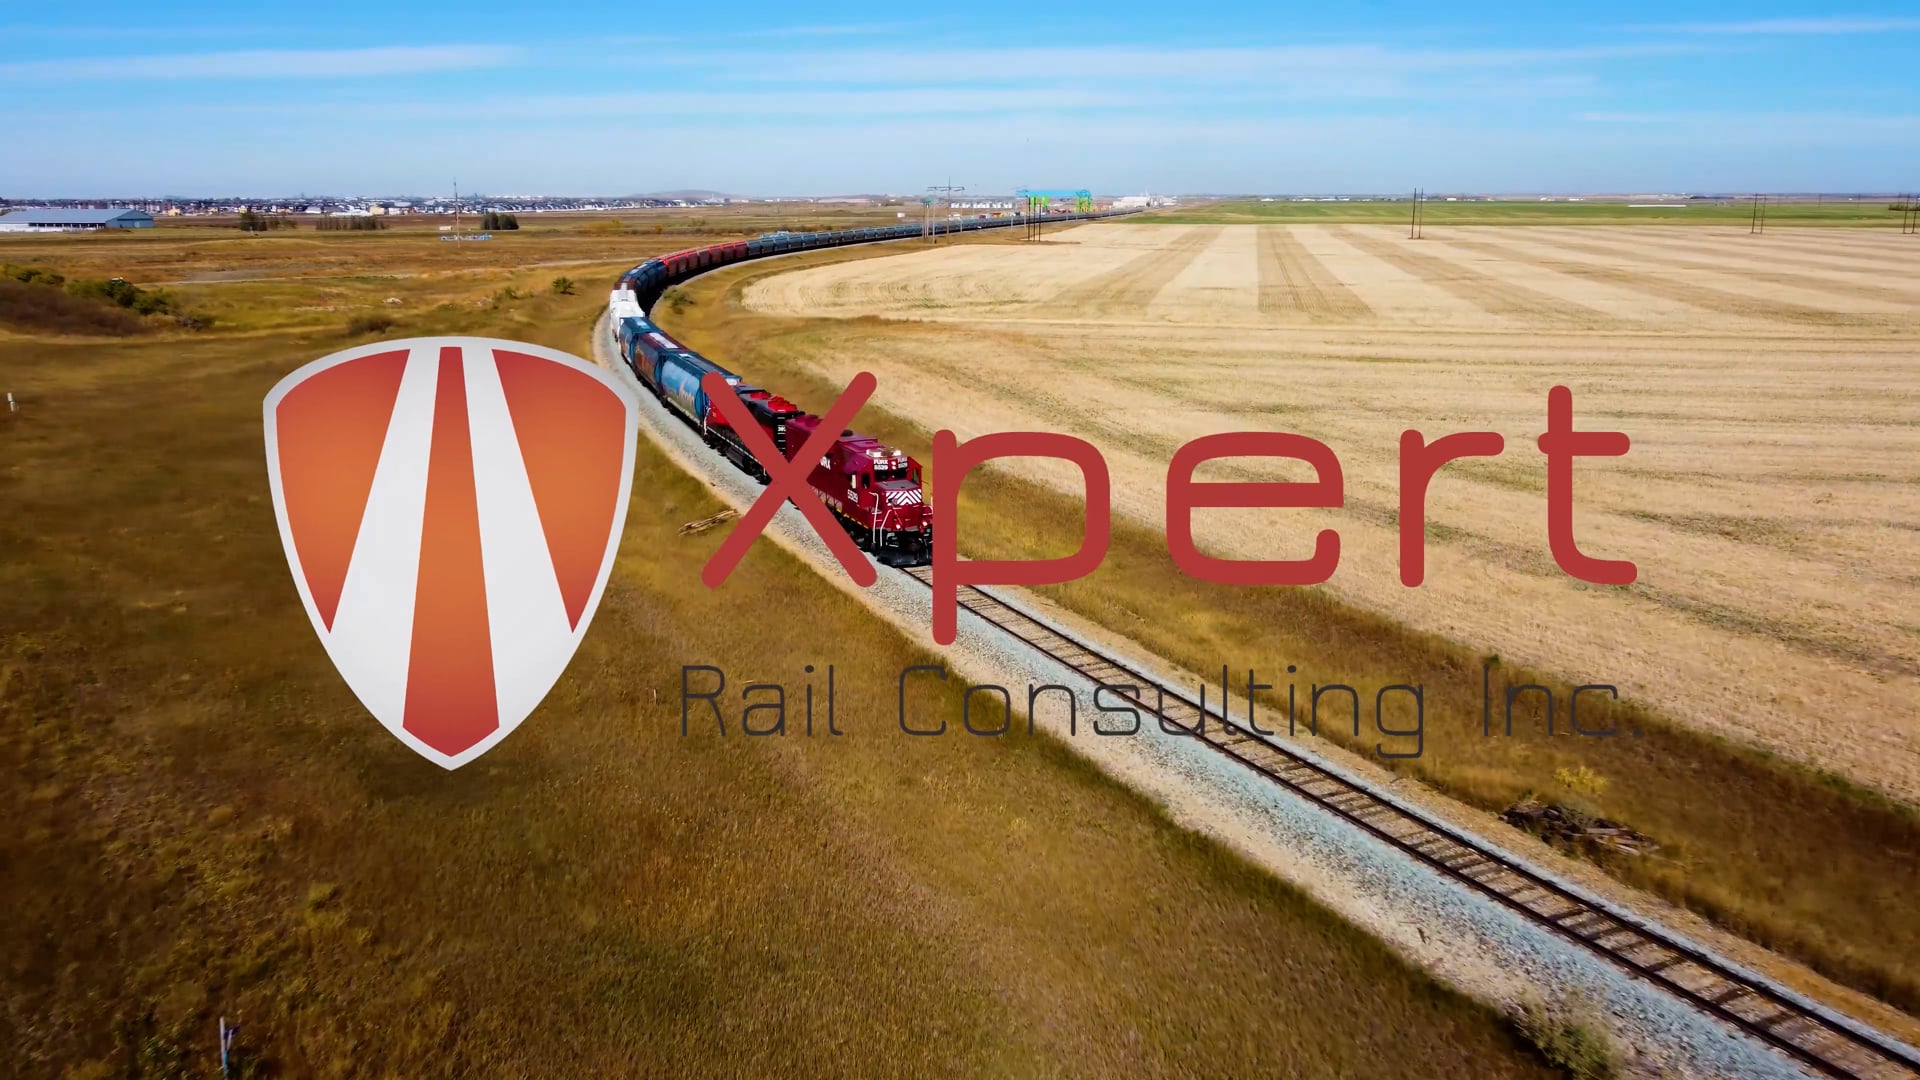 Xpert Rail Consulting